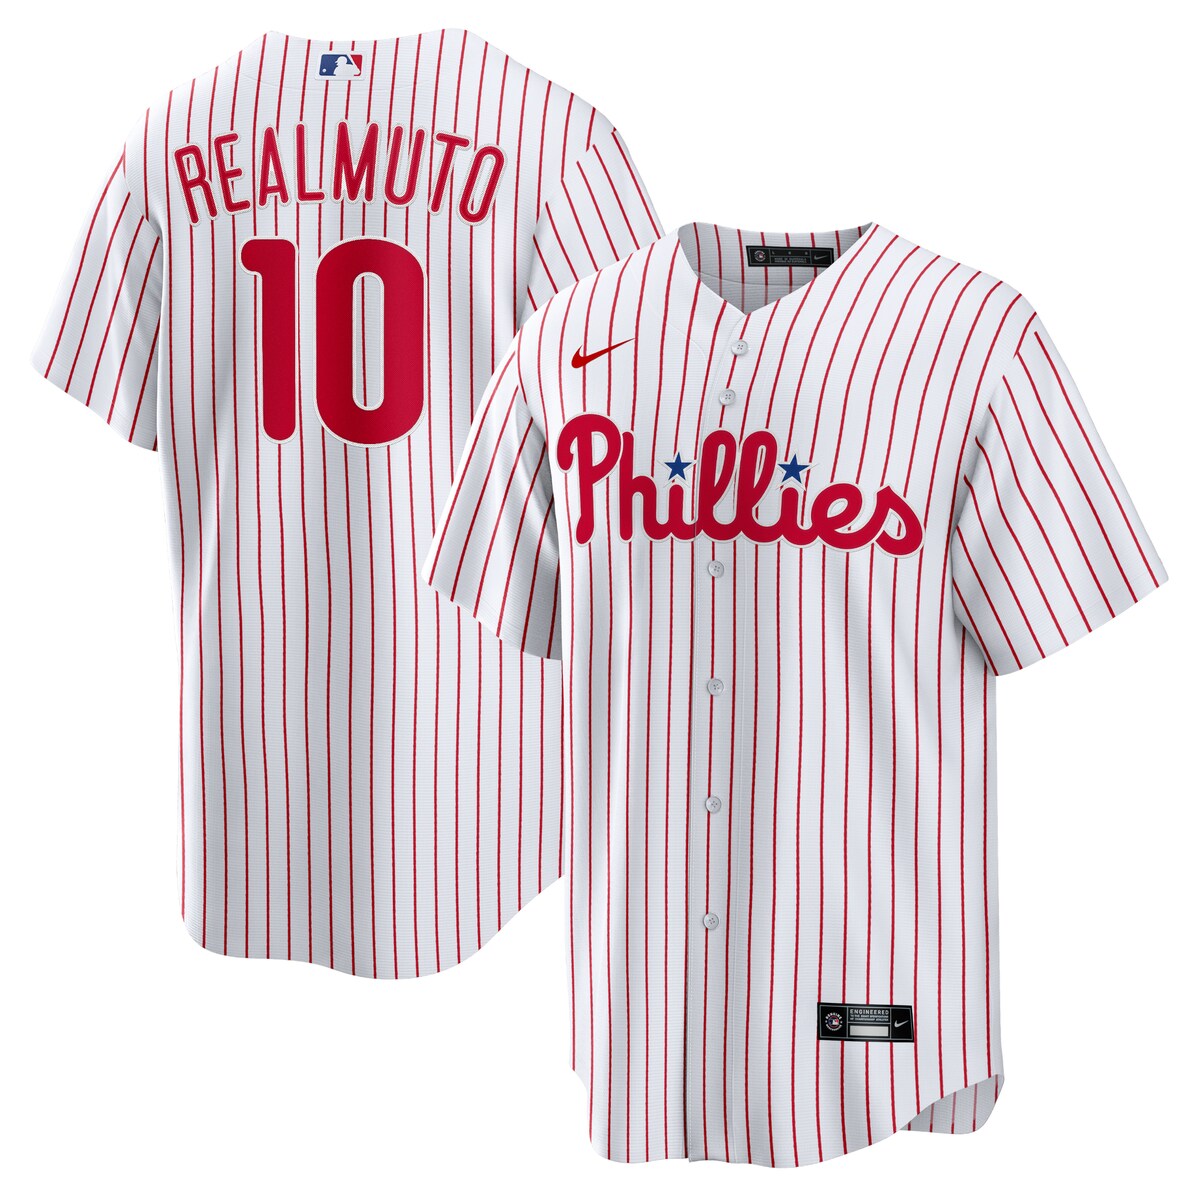 You're the type of Philadelphia Phillies fan who counts down the minutes until the first pitch. When your squad finally hits the field, show your support all game long with this JT Realmuto Replica jersey from Nike. Its classic full-button design features the name and number of your favorite player in crisp applique graphics, leaving no doubt you'll be along for the ride for all 162 games and beyond this season.Jersey Color Style: HomeReplica JerseyMaterial: 100% PolyesterImportedHeat-sealed jock tagMachine wash gentle or dry clean. Tumble dry low, hang dry preferred.Officially licensedBrand: NikeRounded hemHeat-sealed transfer appliqueMLB Batterman applique on center back neckFull-button front